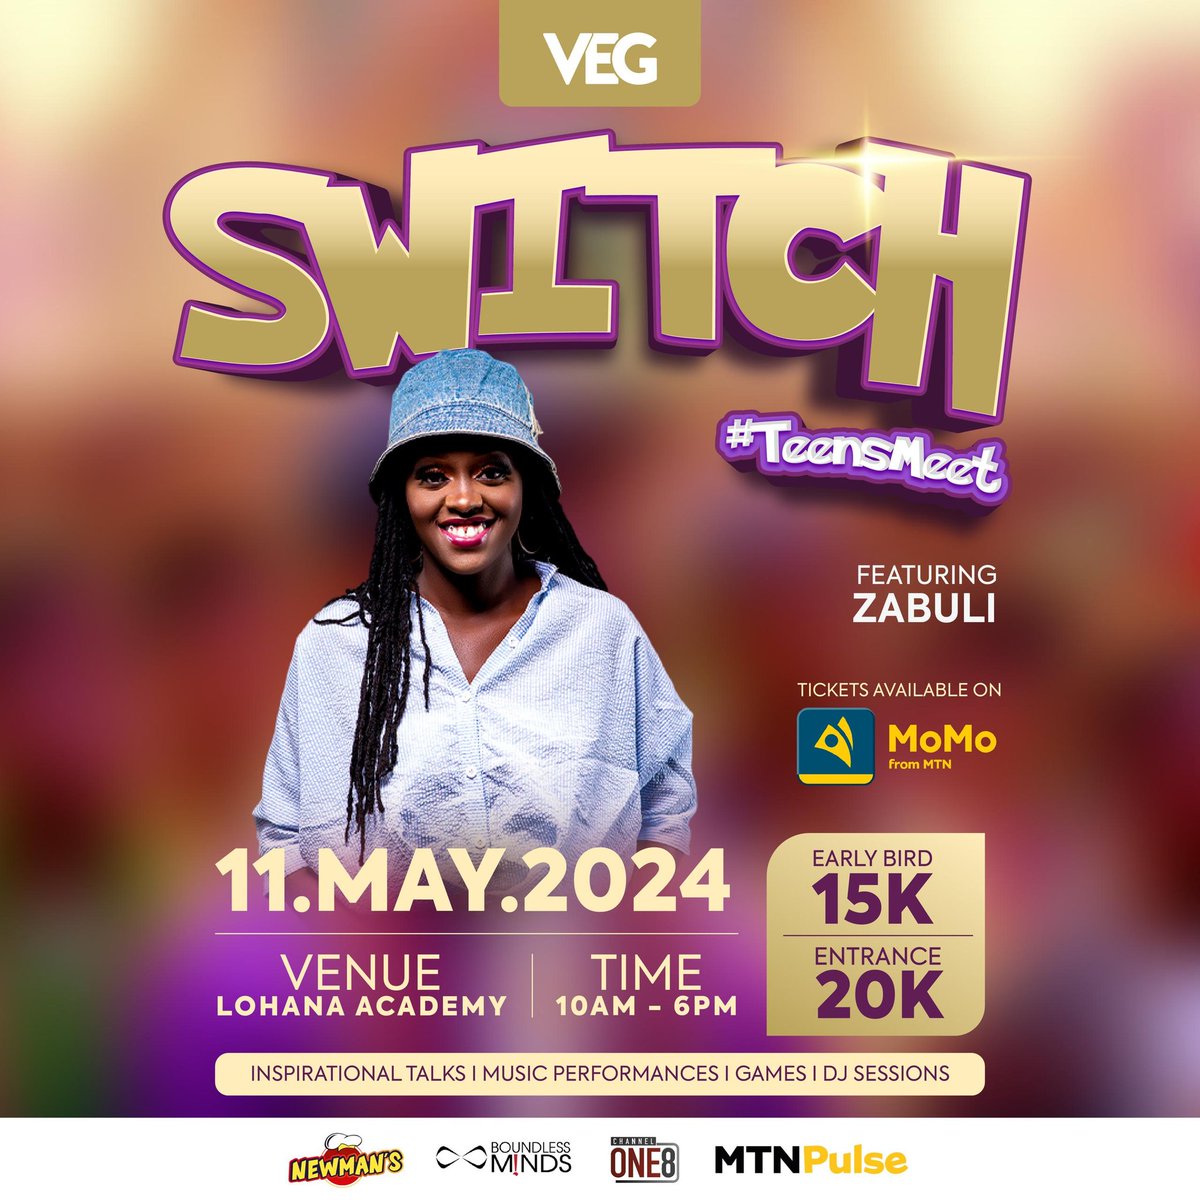 With @zabuli_256 and @BenjiKasule it's a PARTEE at #Switch2024 #TeensMeet #itsalifestyle